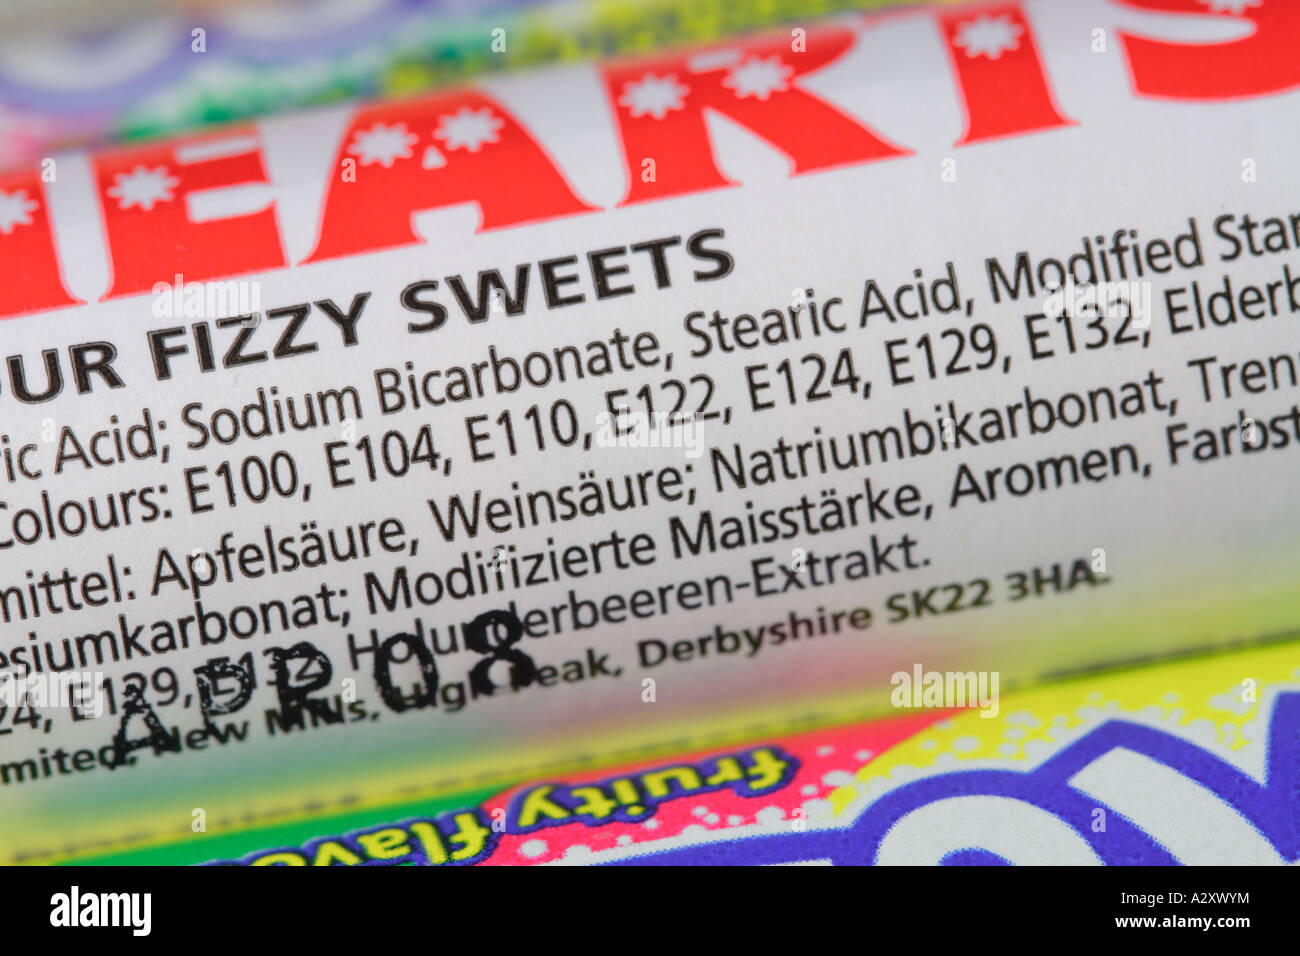 Childrens sweets candy ingredient content consumer information label Stock Photo